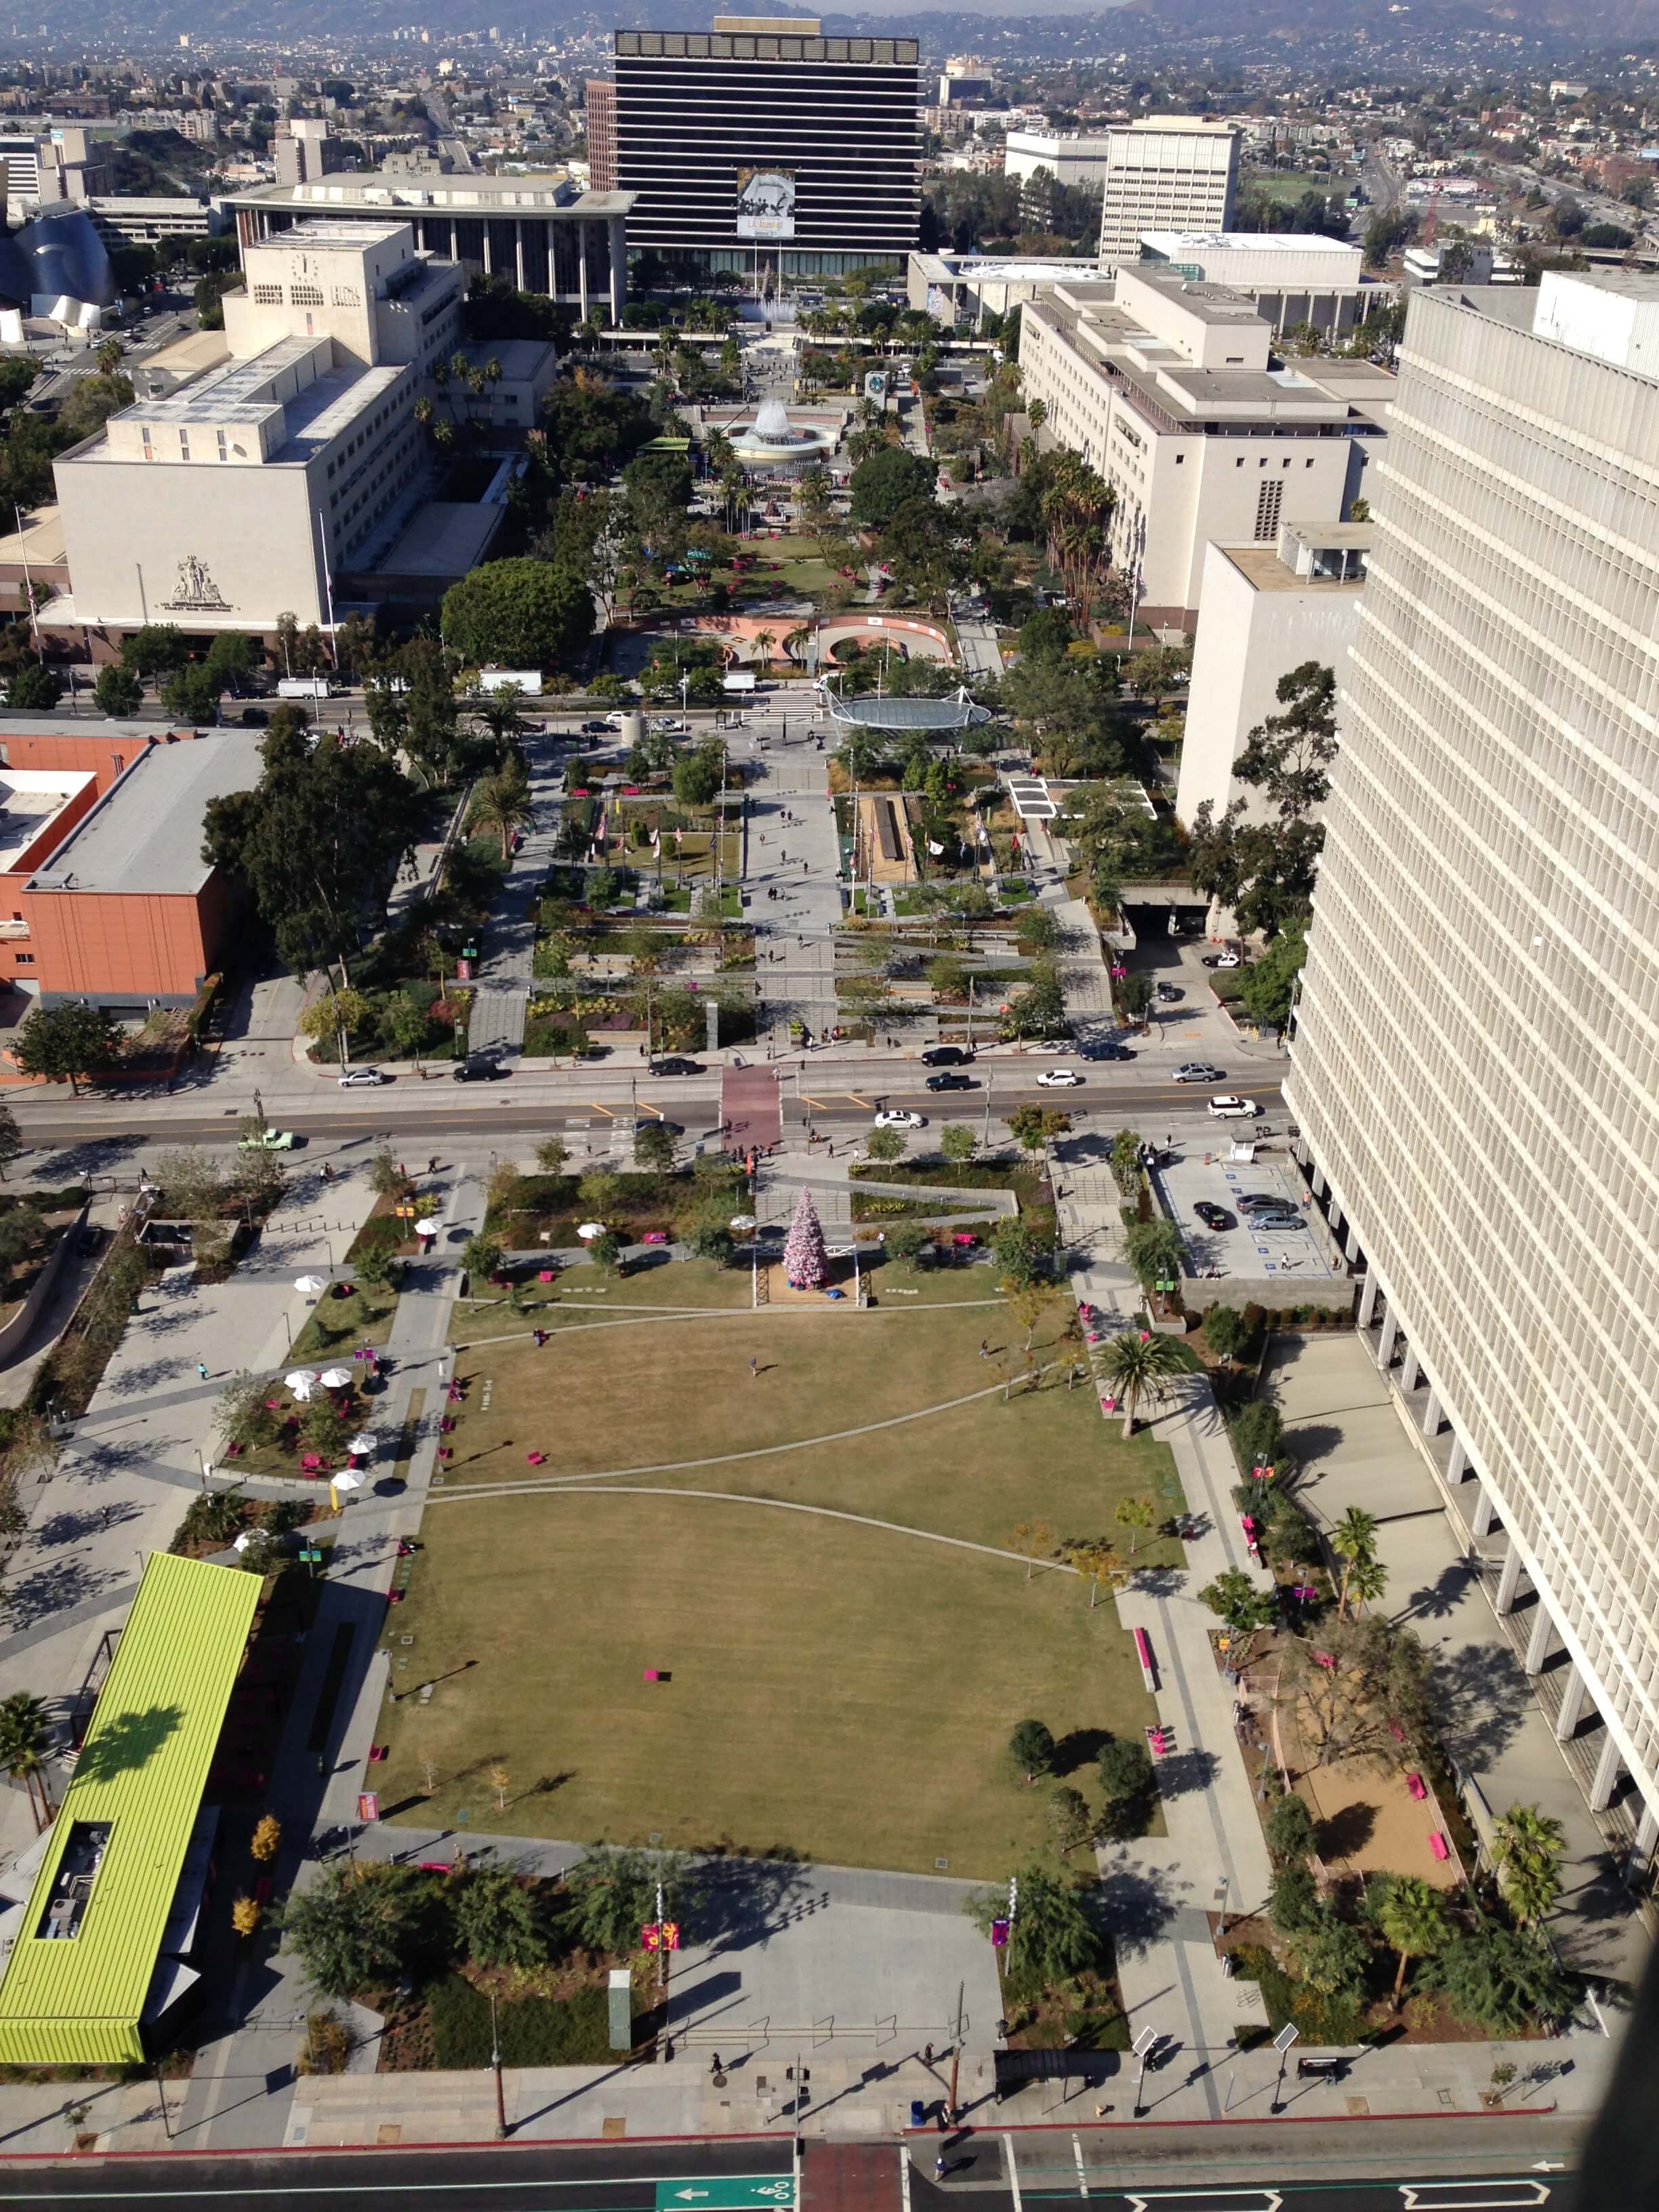 View of Grand Park from the City Hall Observation Deck